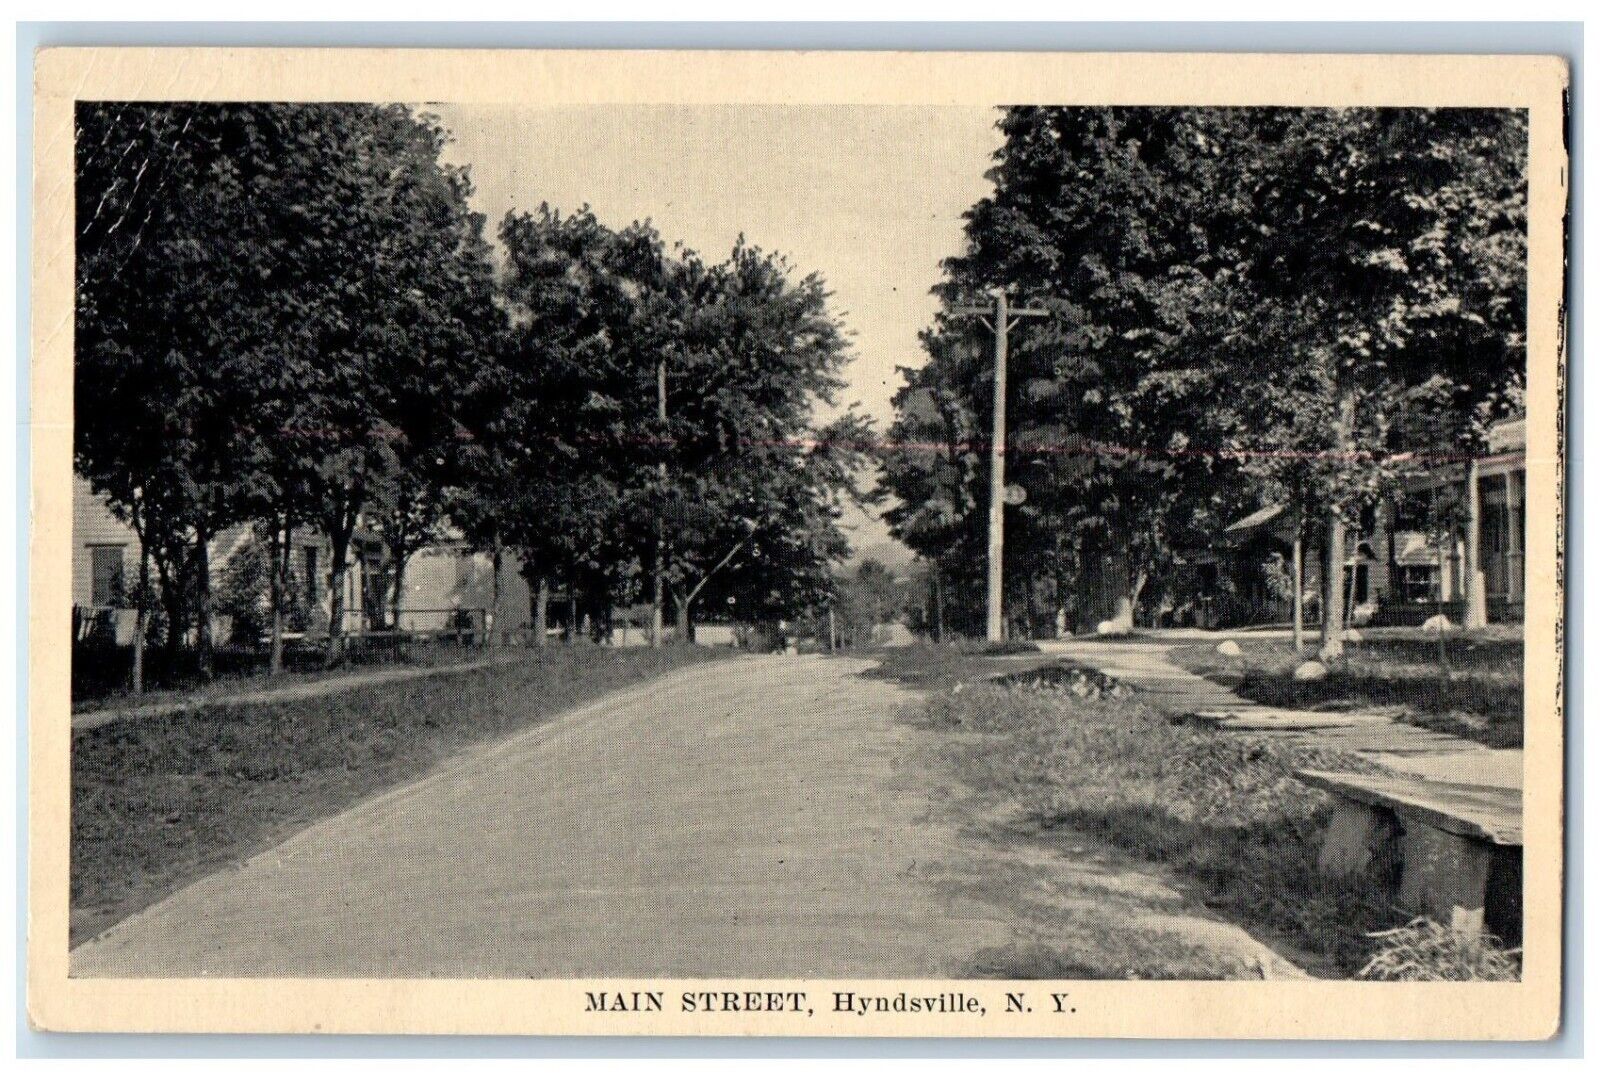 1910 Main Street View Dirt Road Hyndsville New York NY Posted Antique Postcard